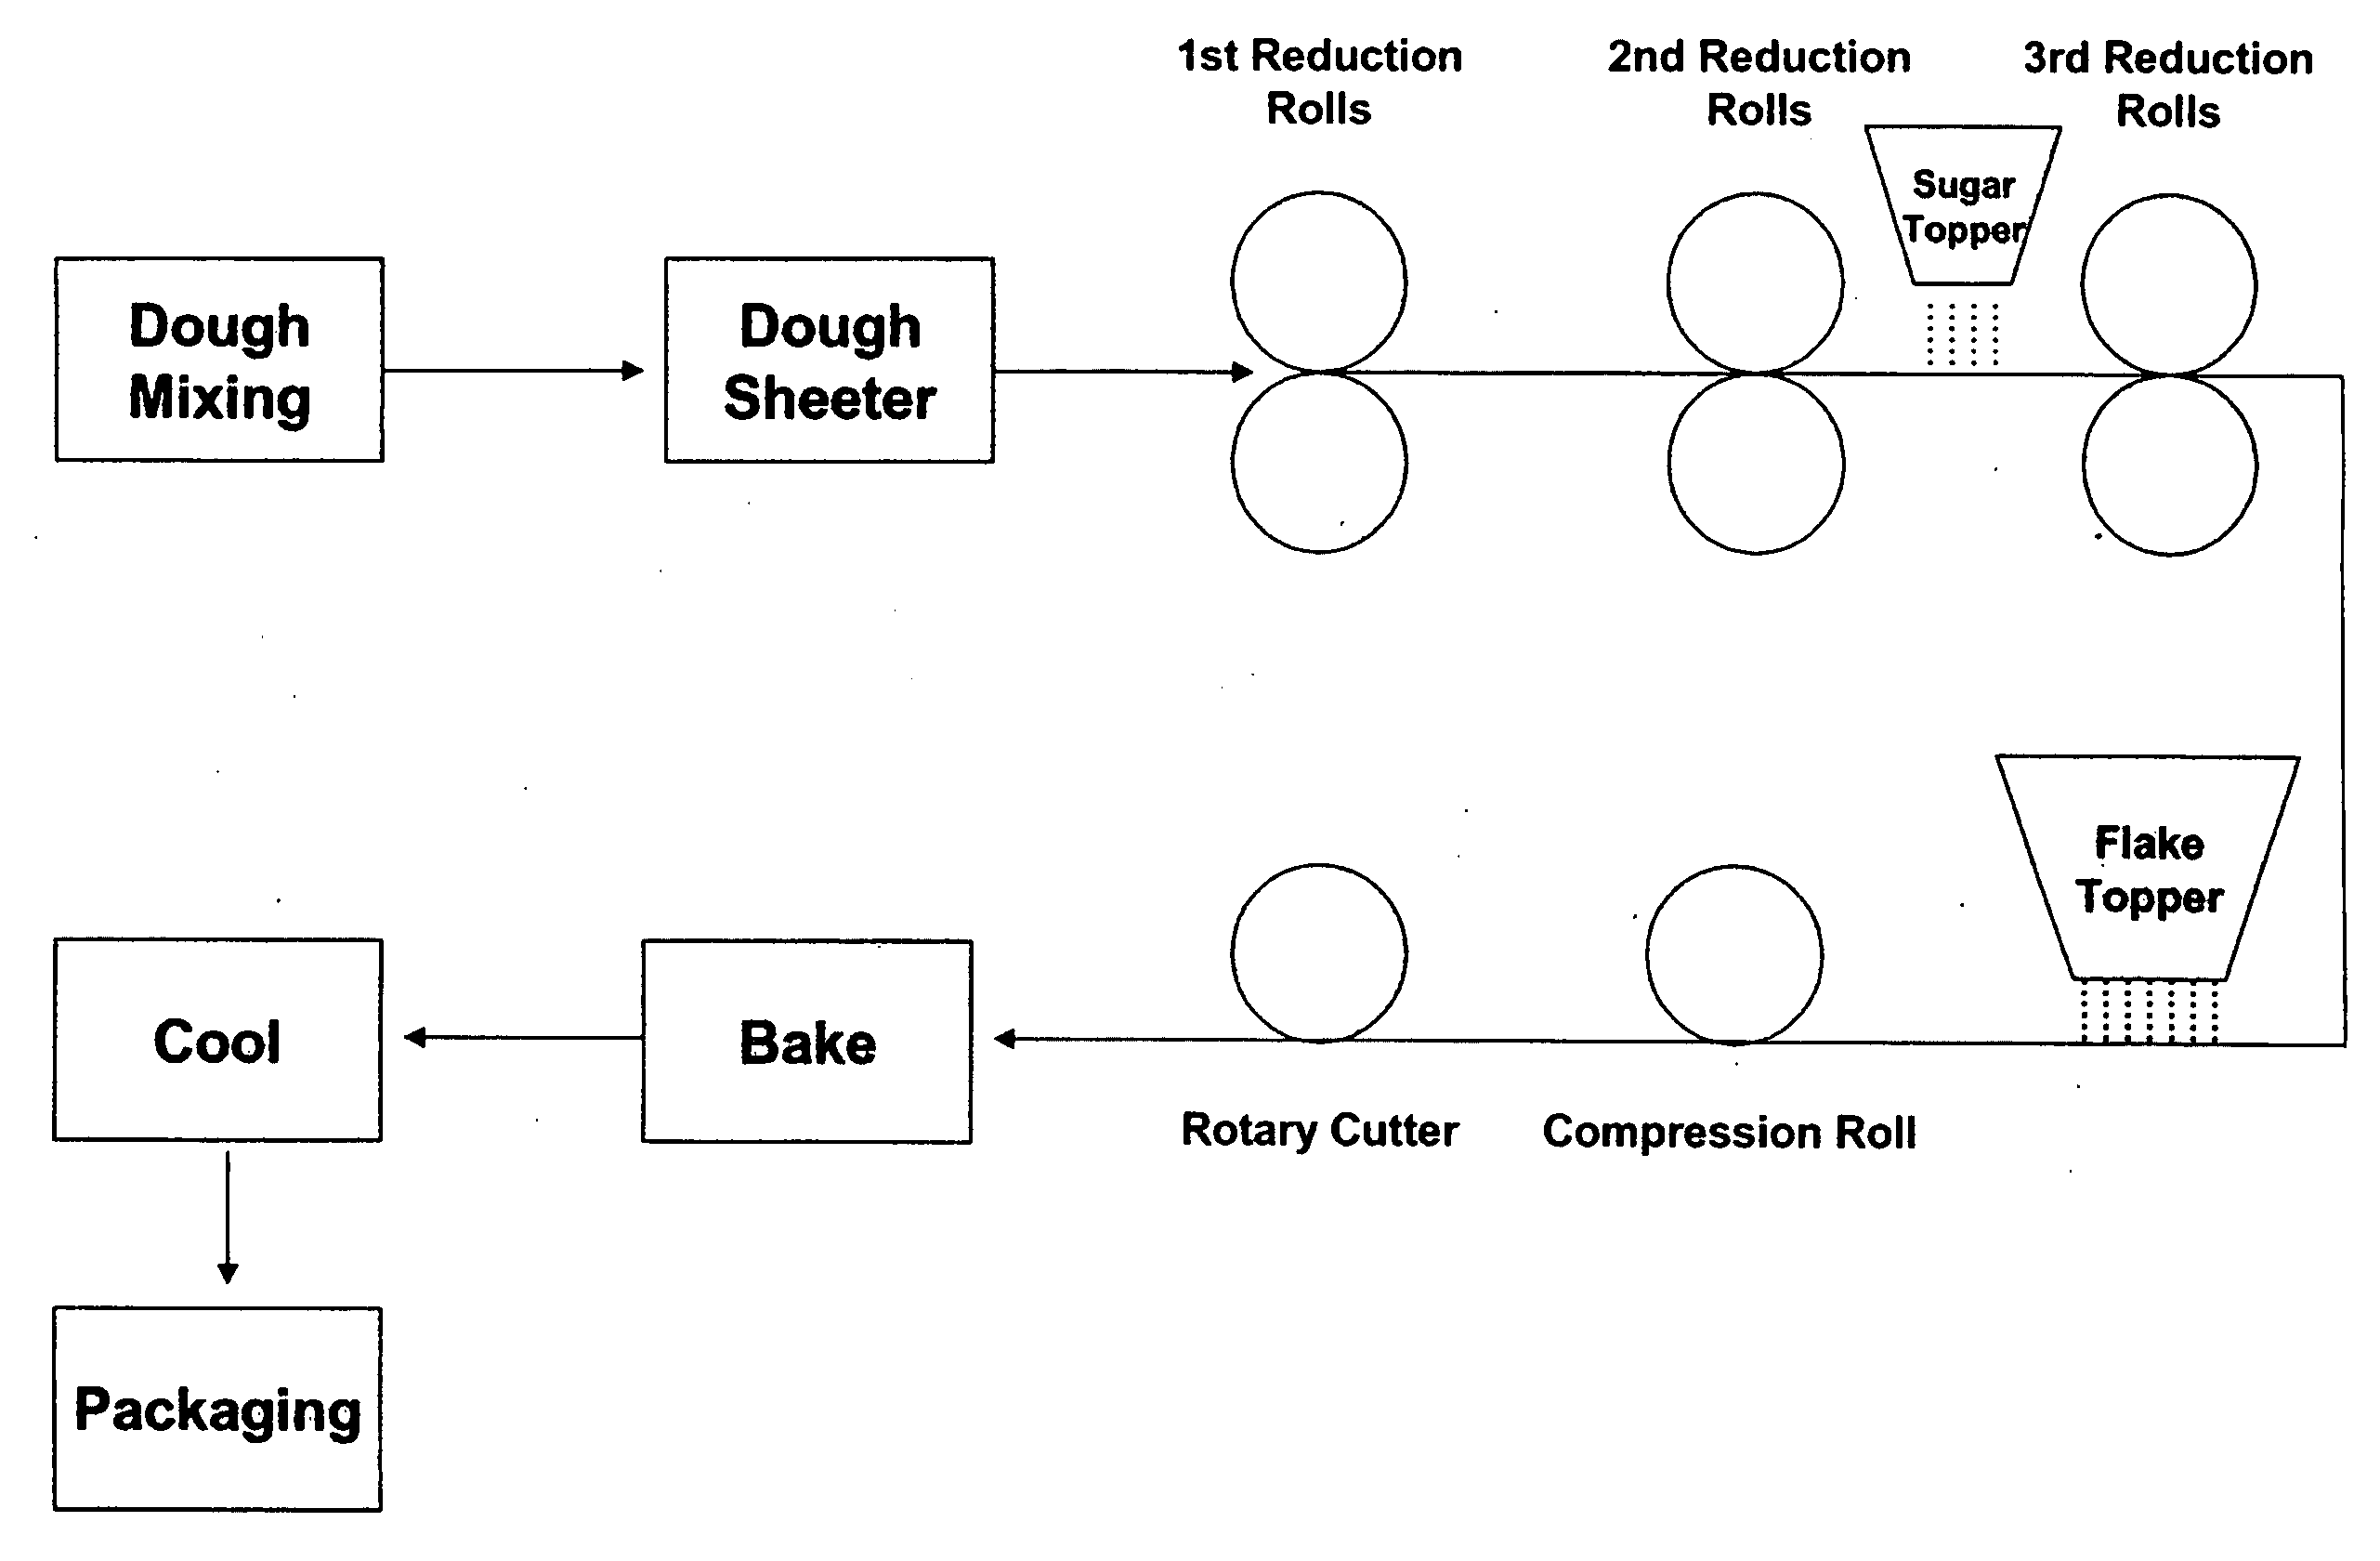 Processes for adhering food particulates to dough and related food items